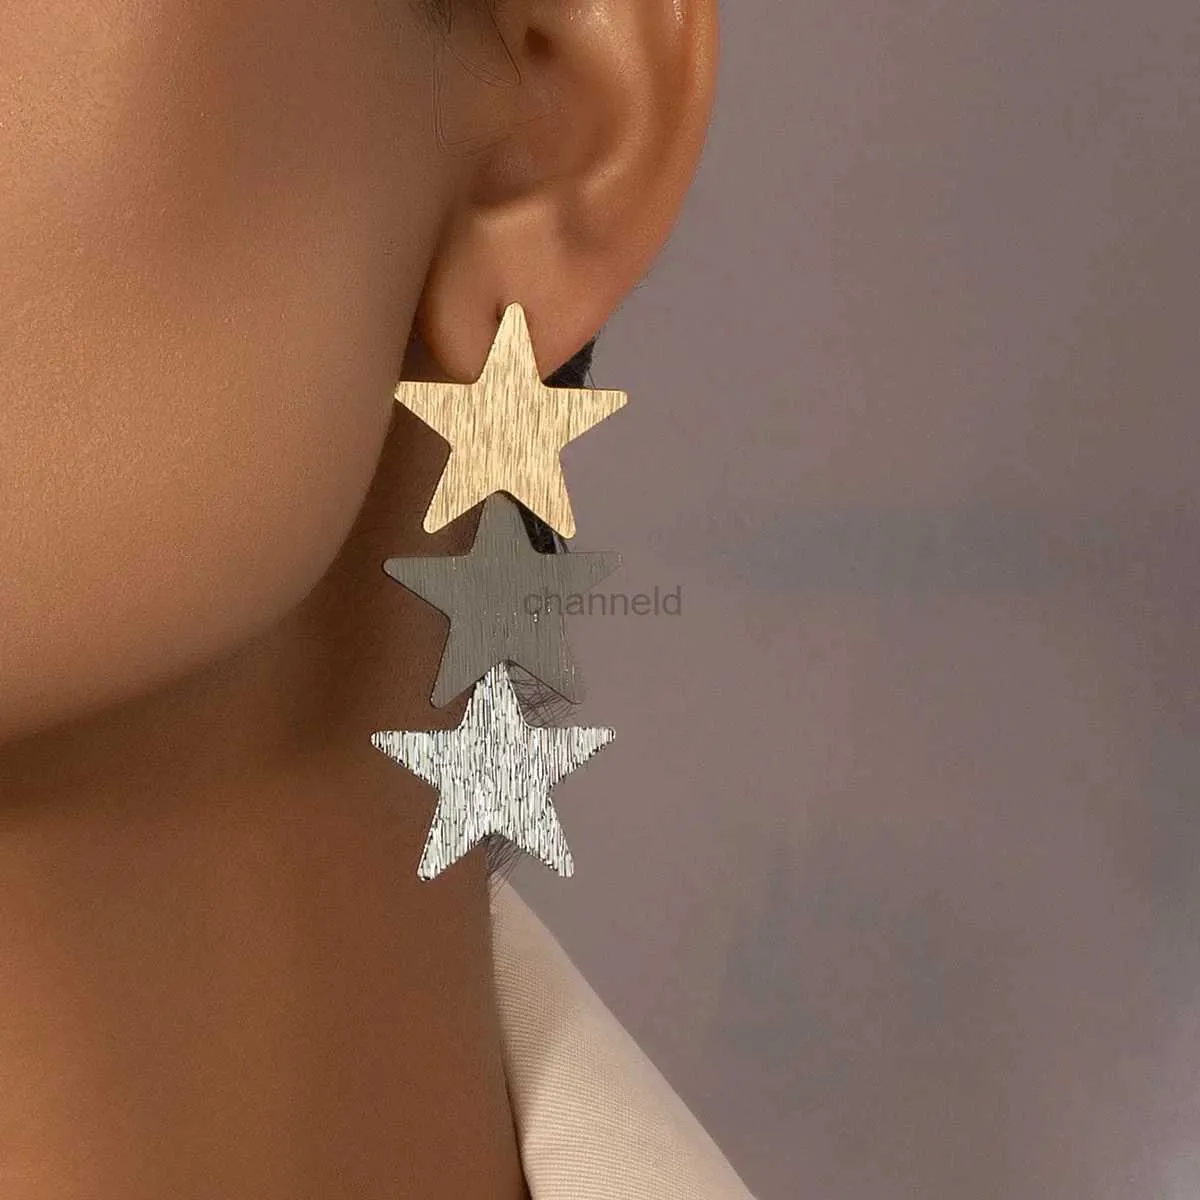 Other Exaggerated Five-pointed Star Hanging Earrings for Women New Fashion Statement Metal Star Tassel Earrings Jewelry Gift 240419